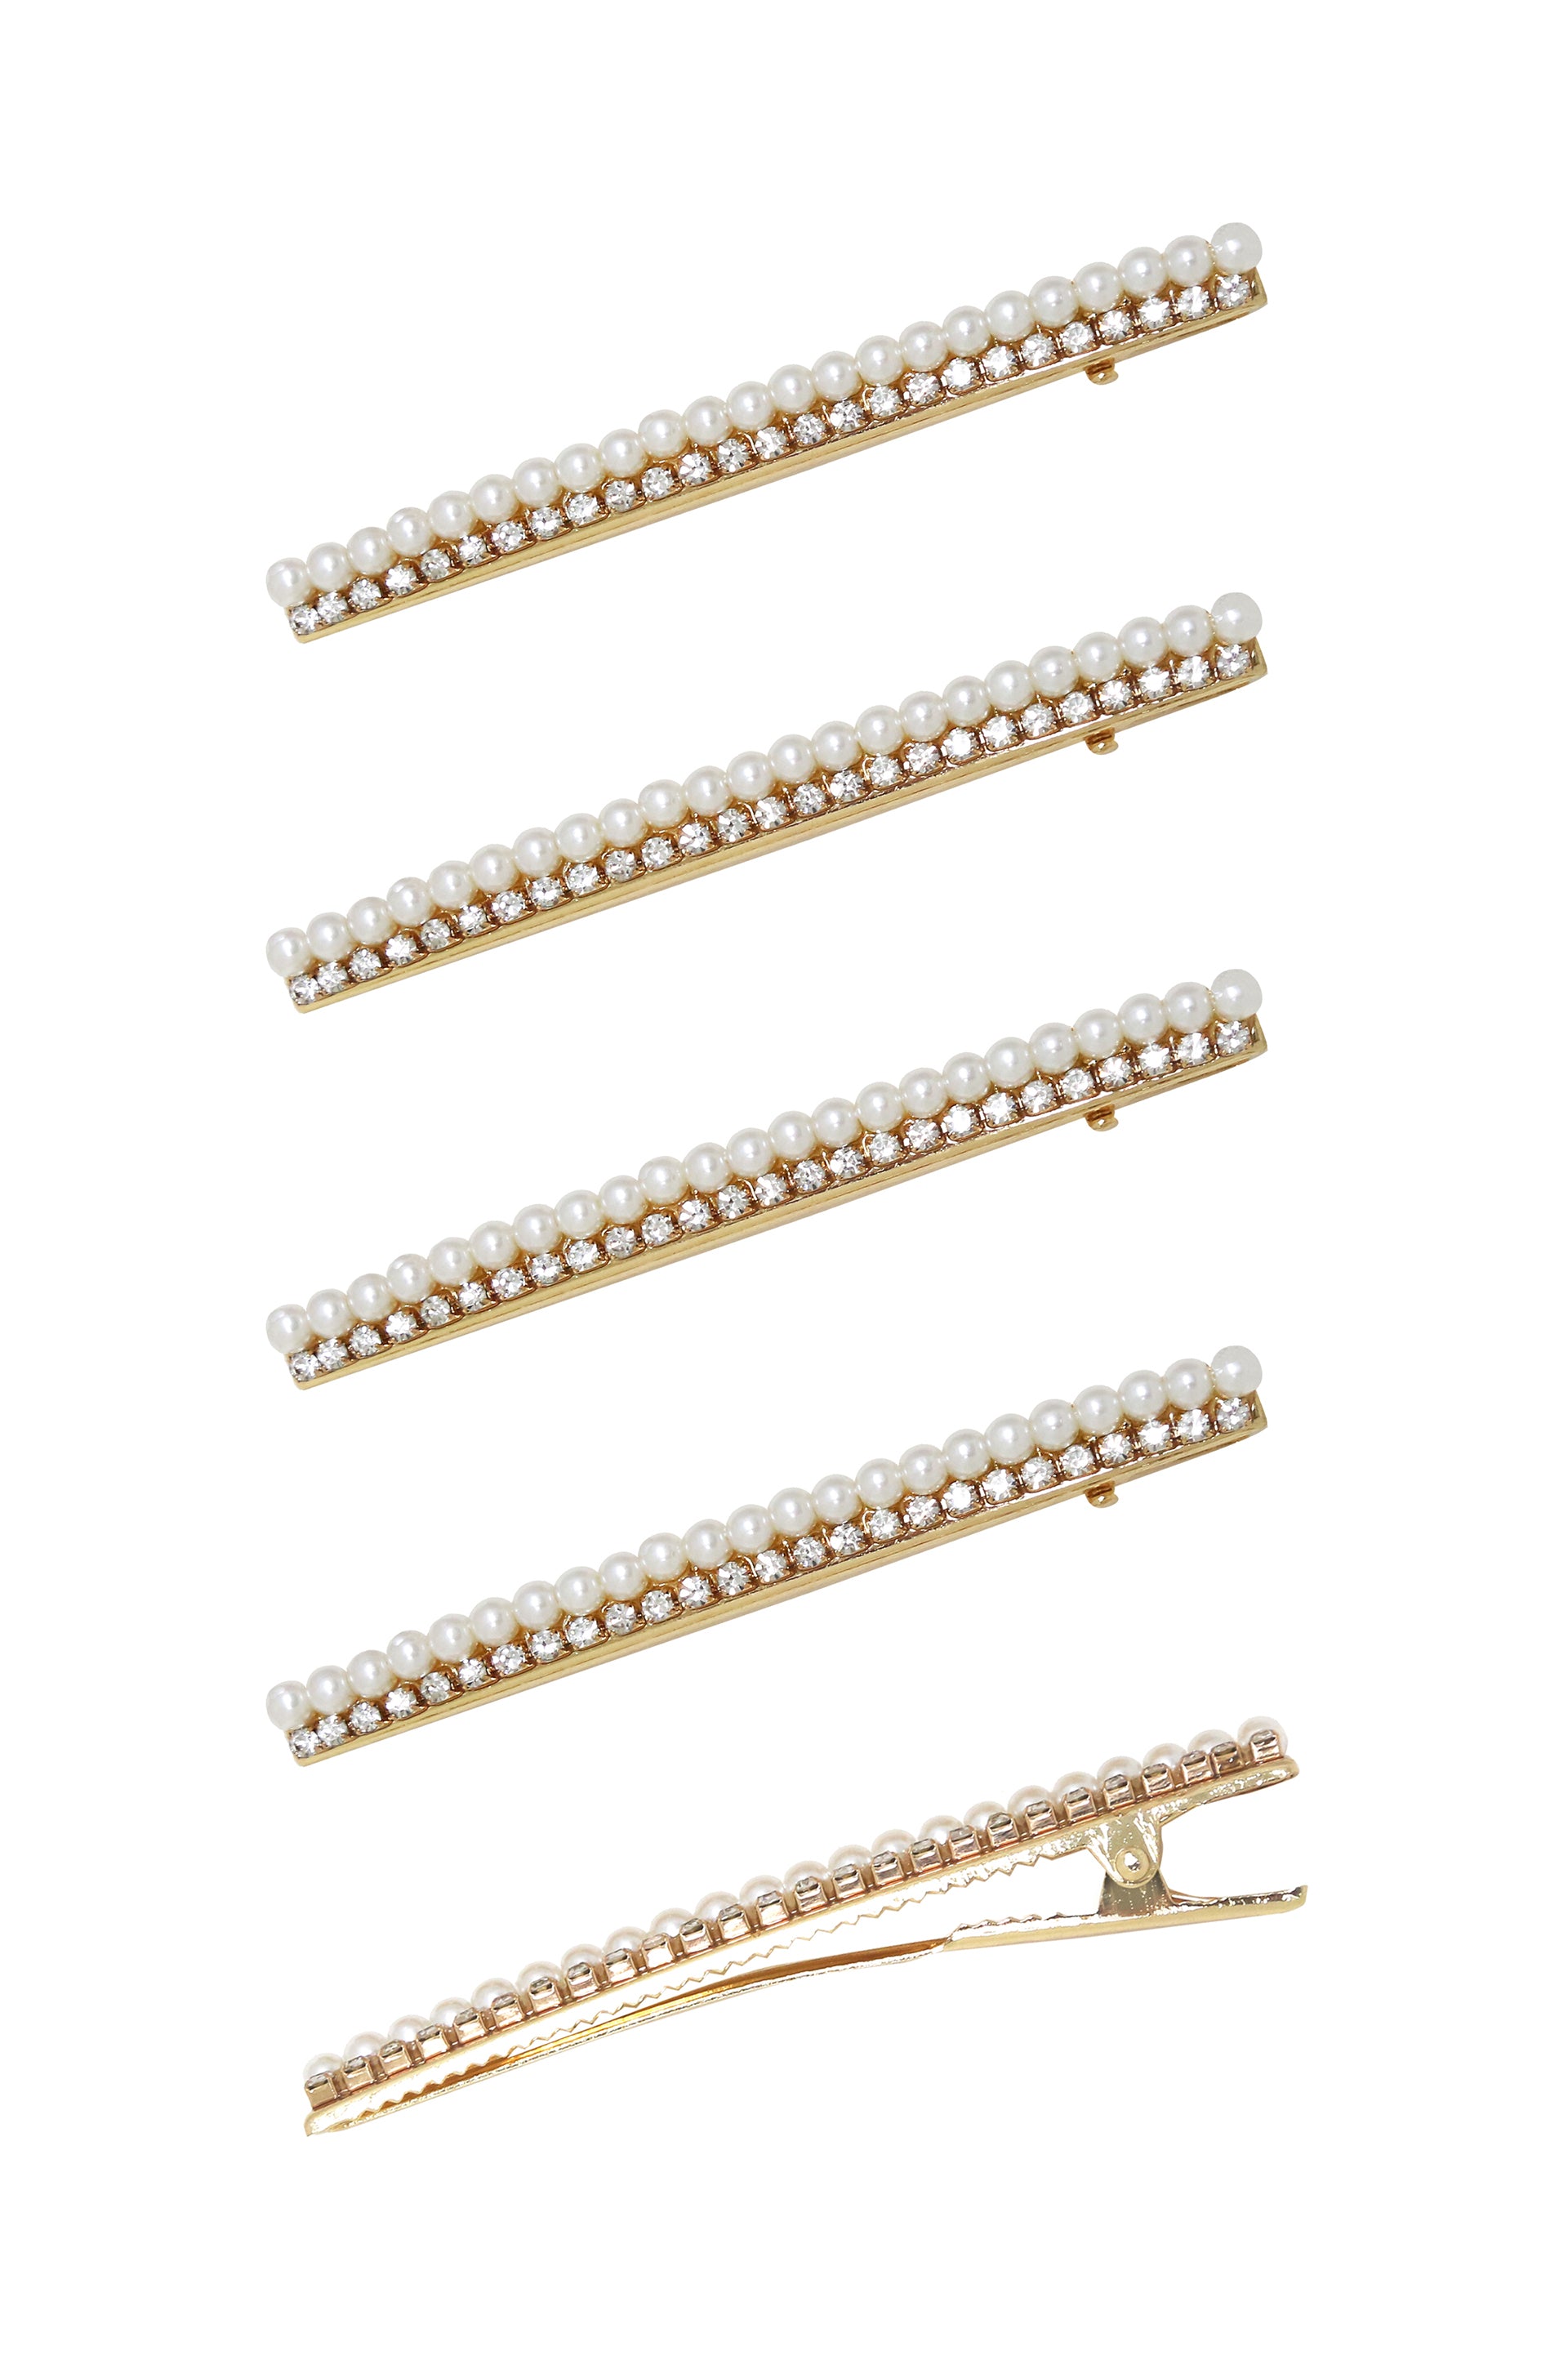 Thin Pearl and Crystal Hair Clip Set on white background  